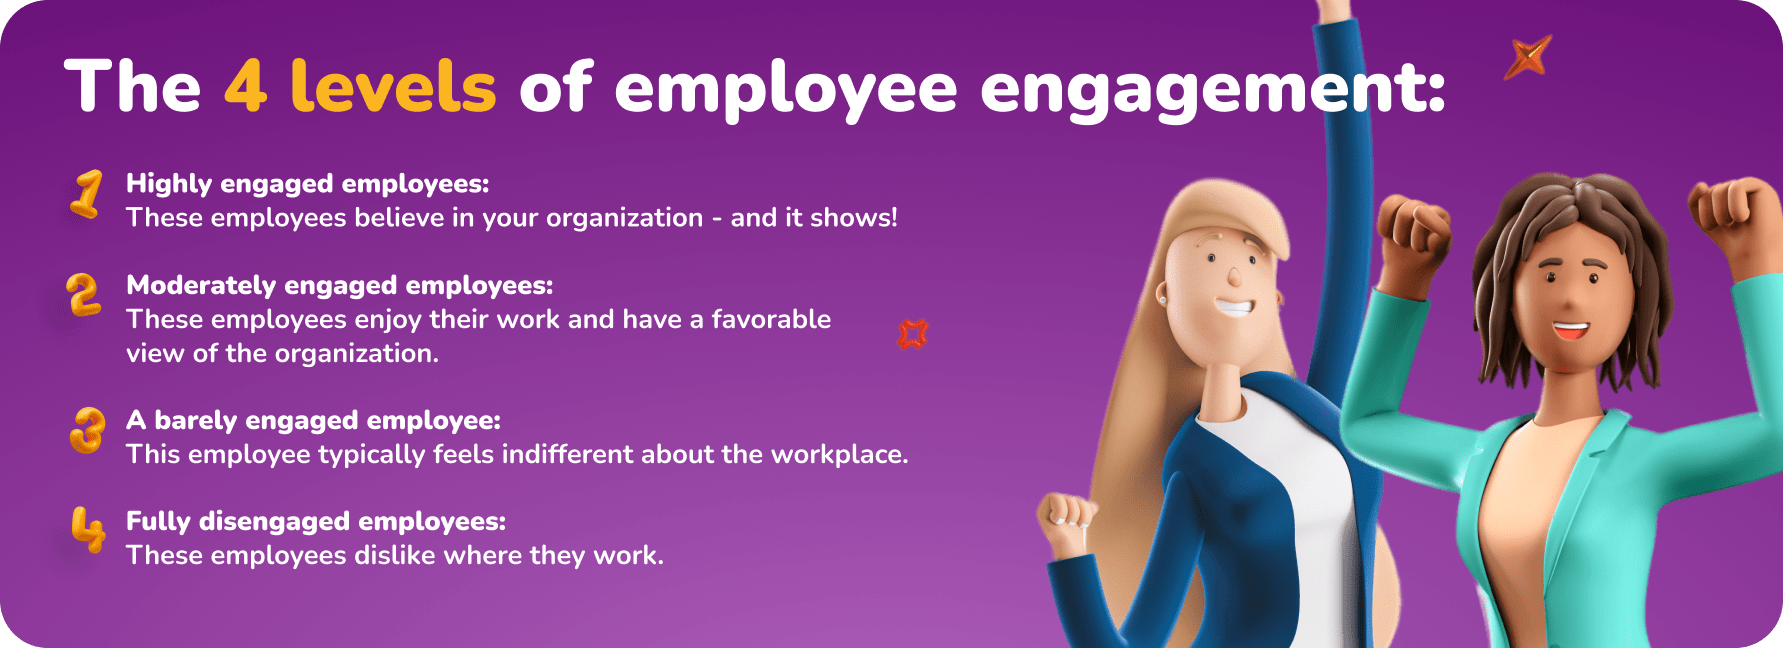 The 4 levels of employee engagement